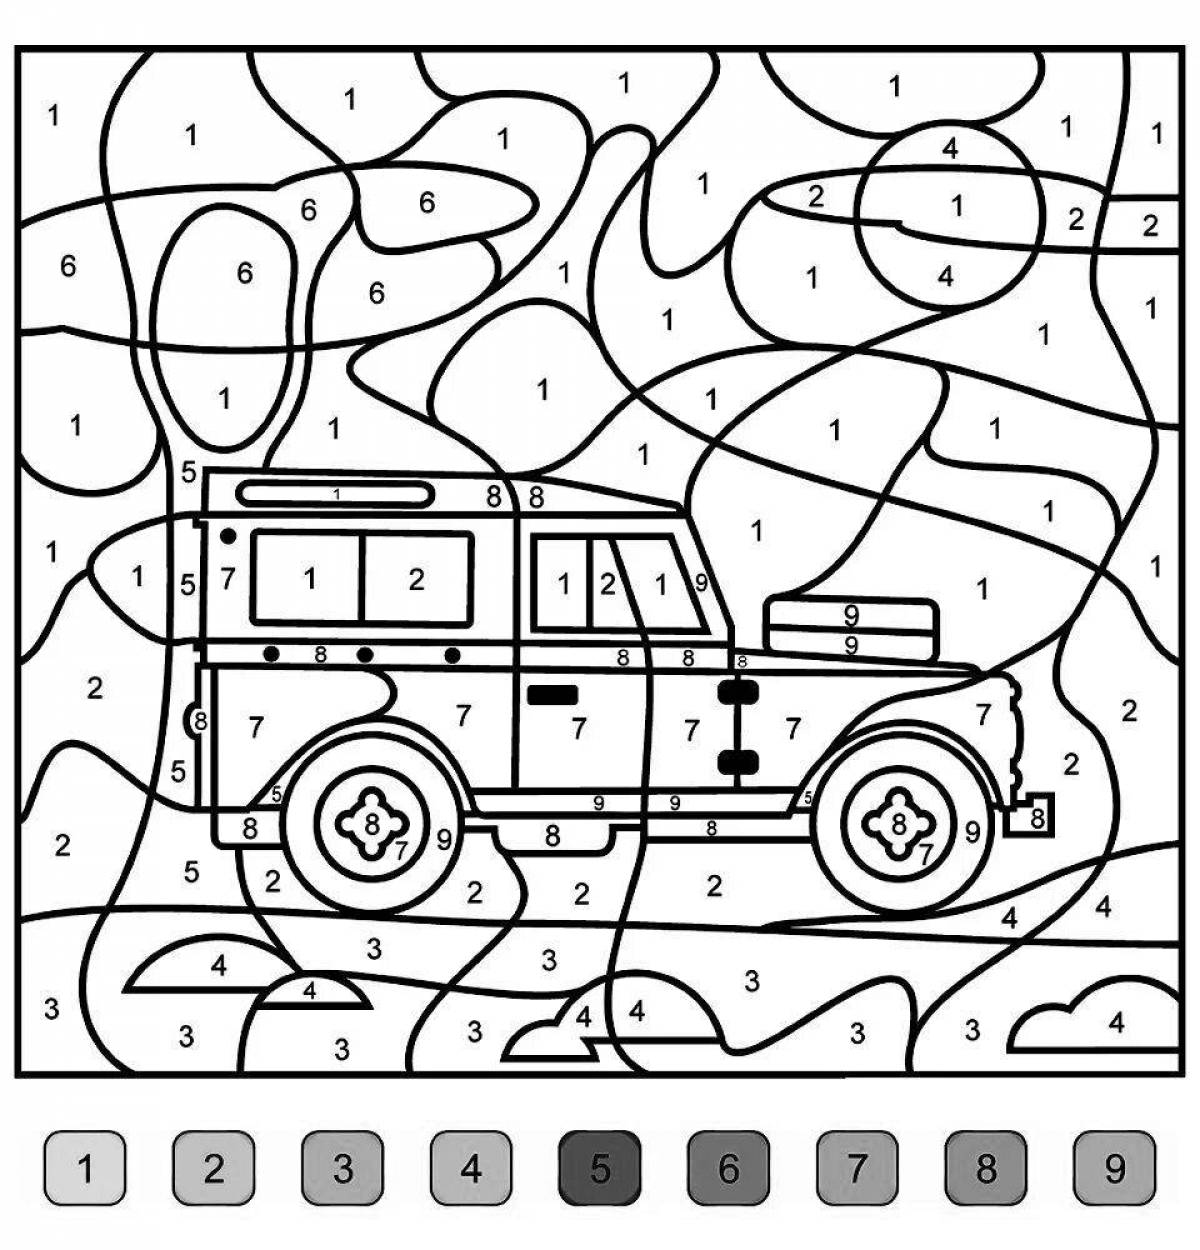 Coloring shining car by numbers